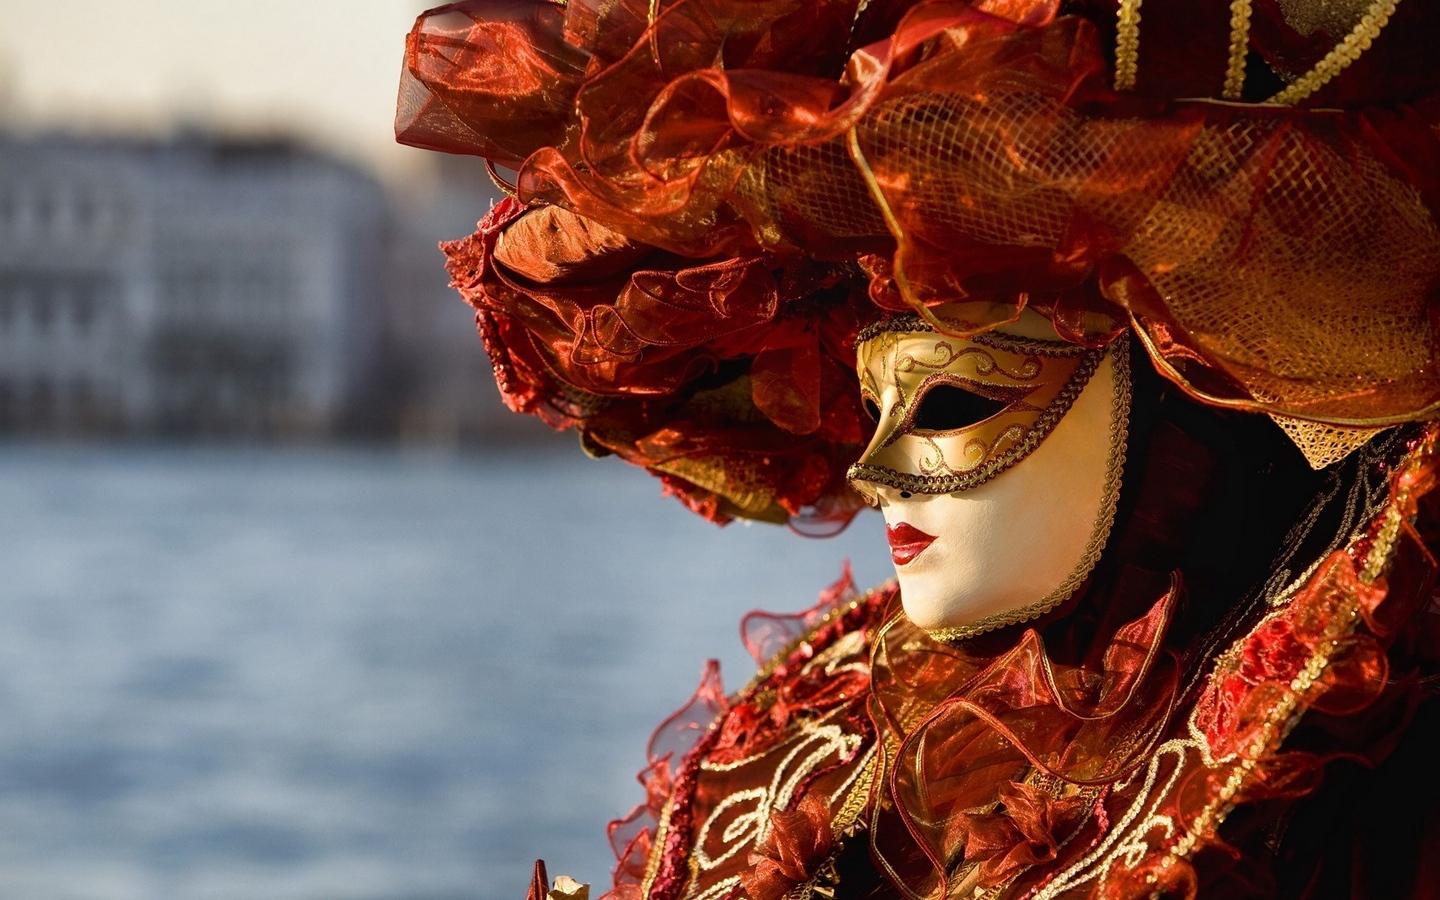 Download wallpaper 1440x900 venice, carnival, mask, outfit